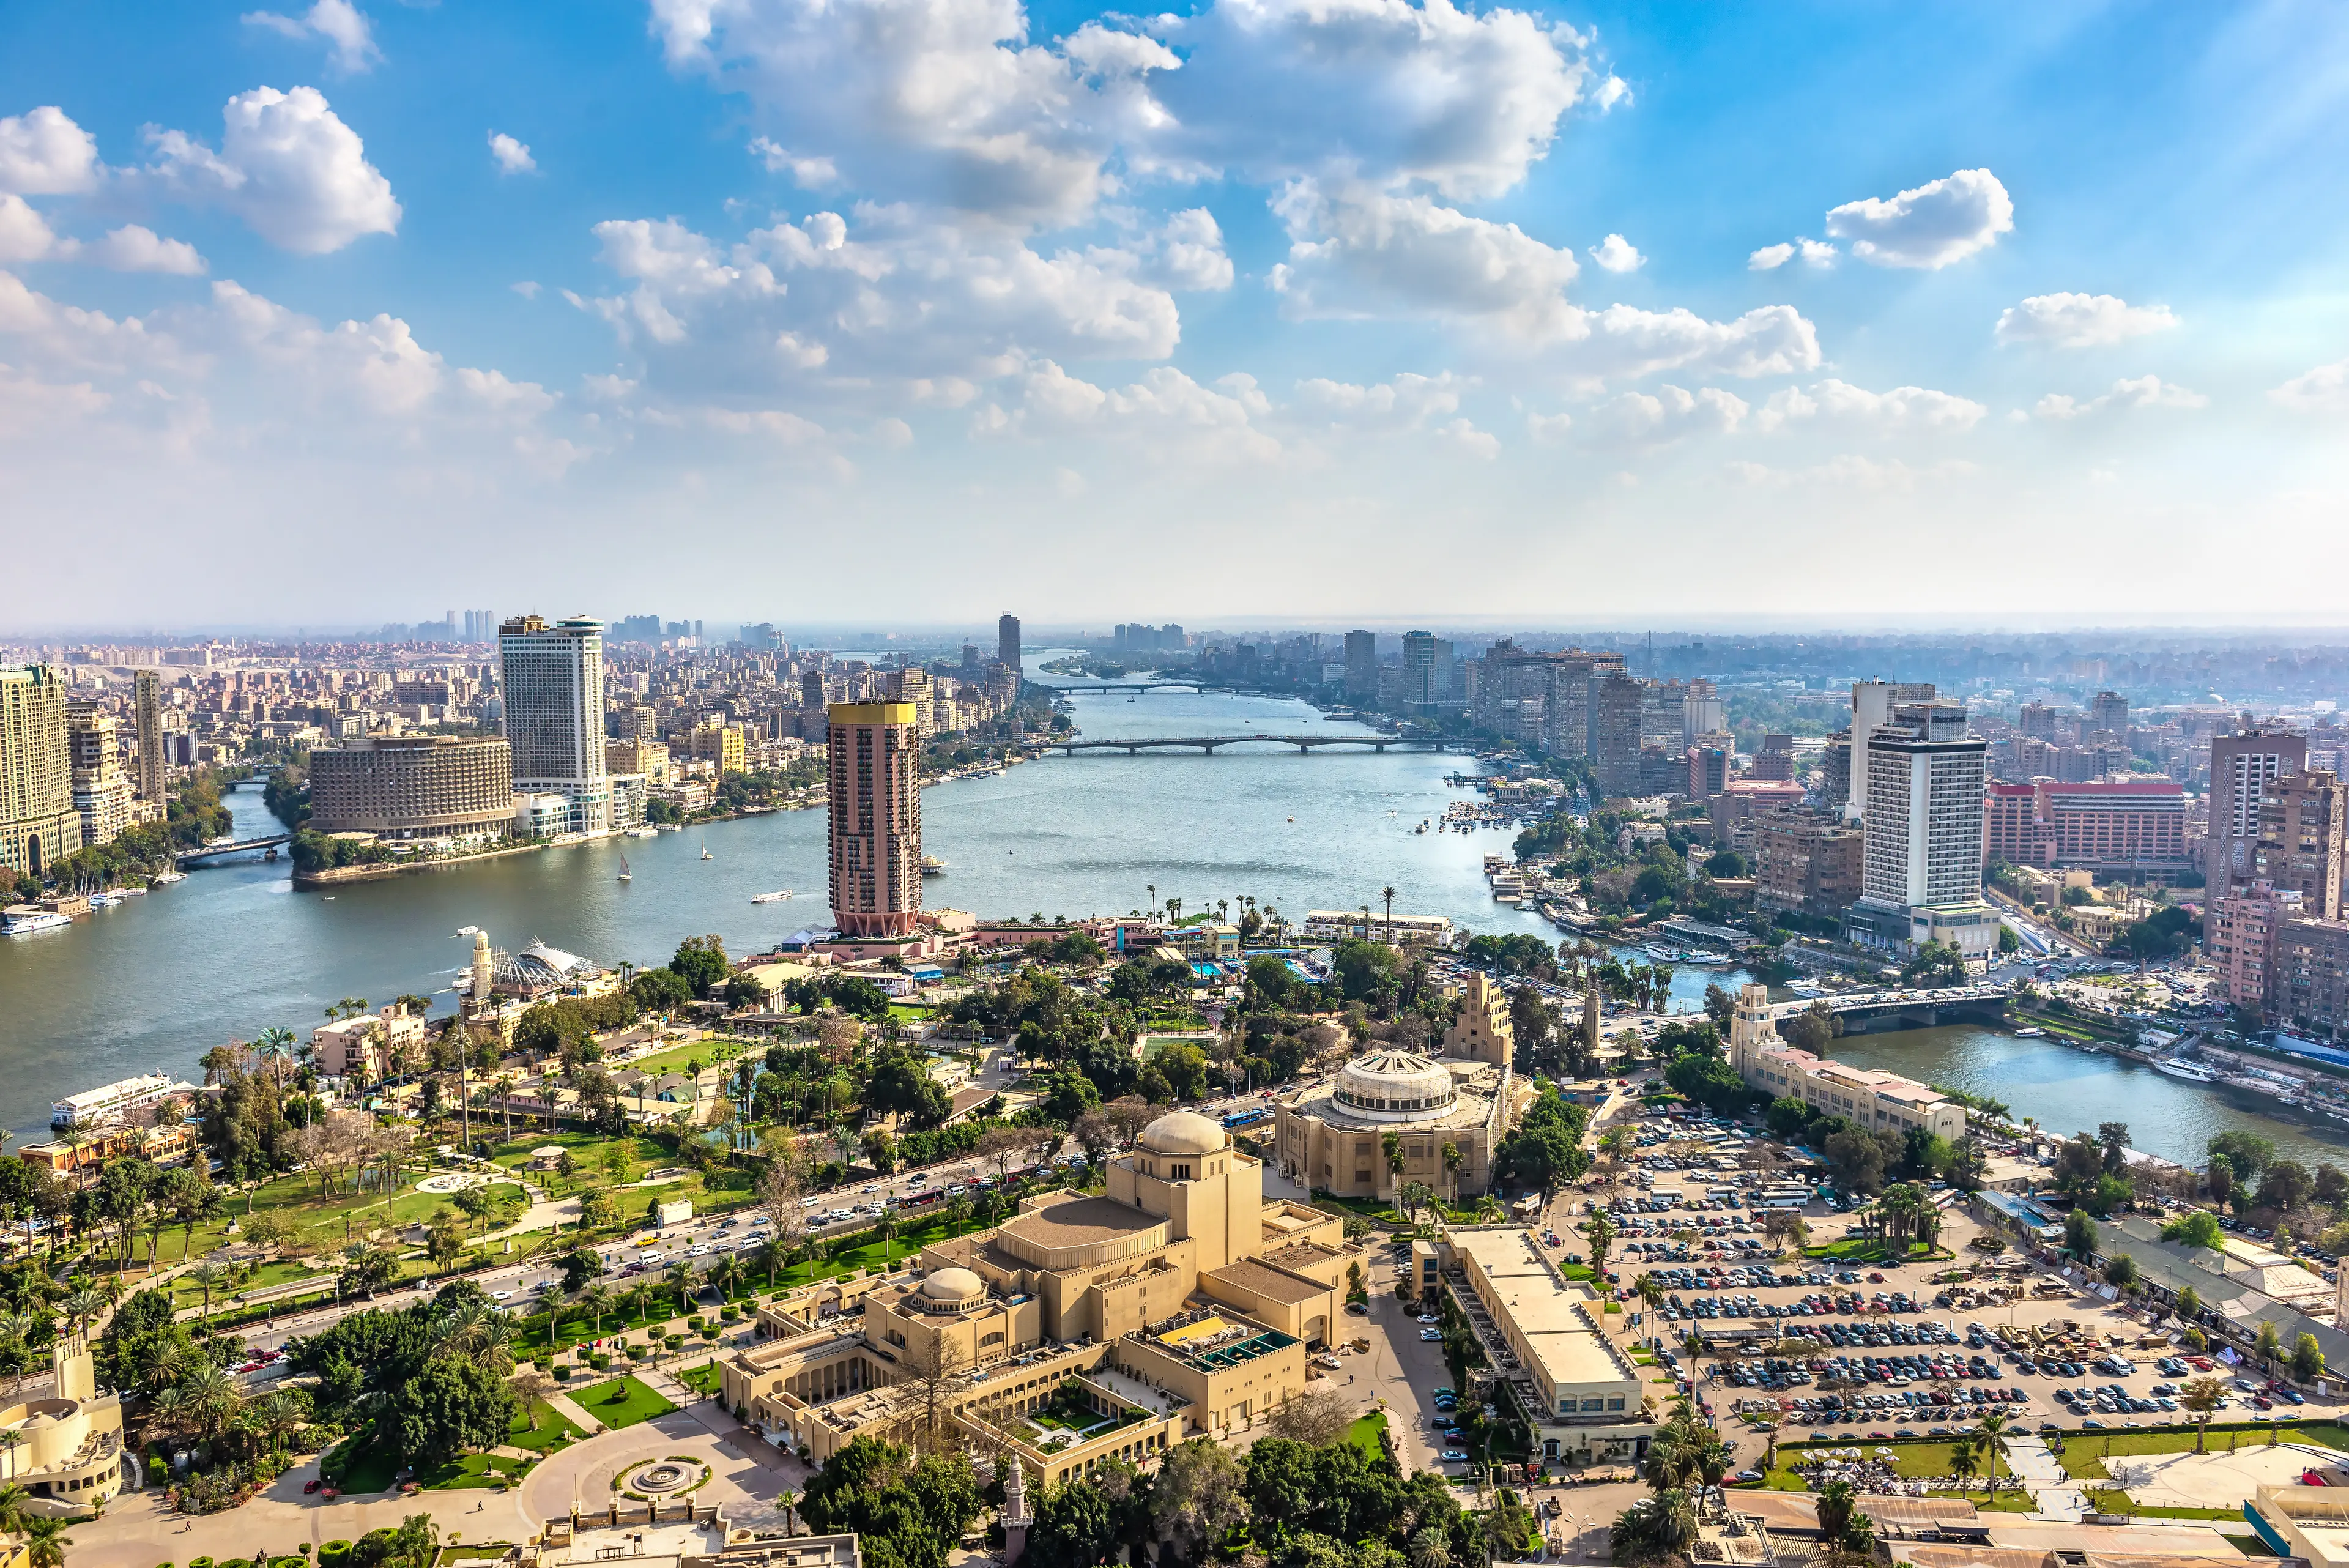 3-Day Cairo Adventure: Sightseeing, Shopping & Food Tour with Friends